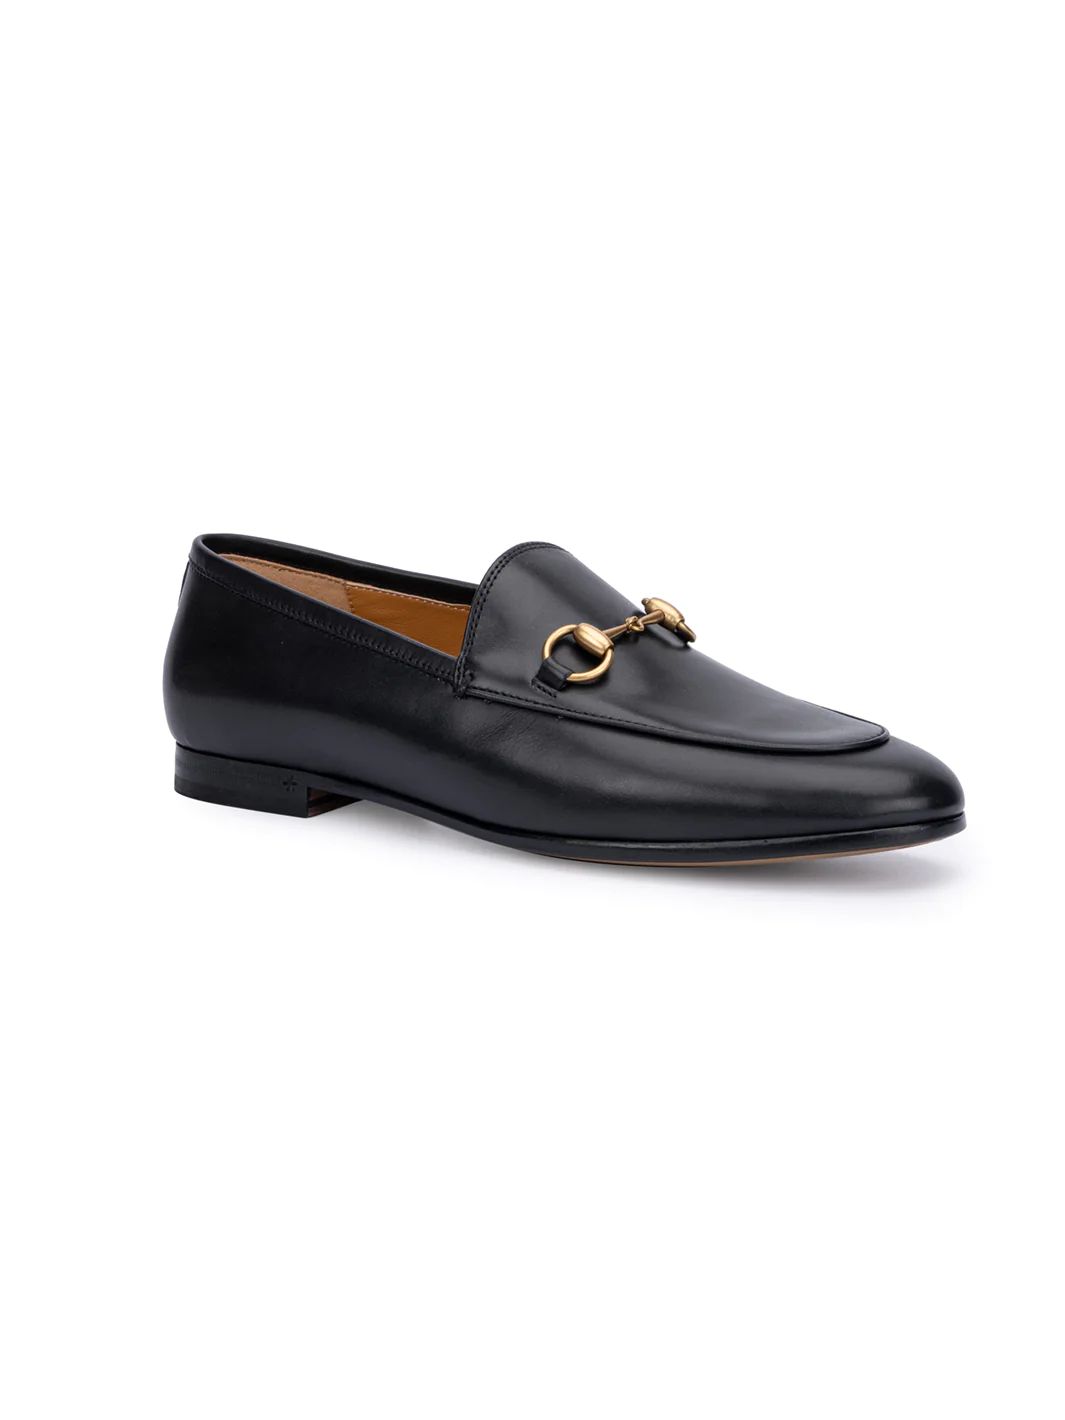 Gucci Women's Jordaan Horsebit Loafer in Black 37.5 Lord & Taylor | Lord & Taylor